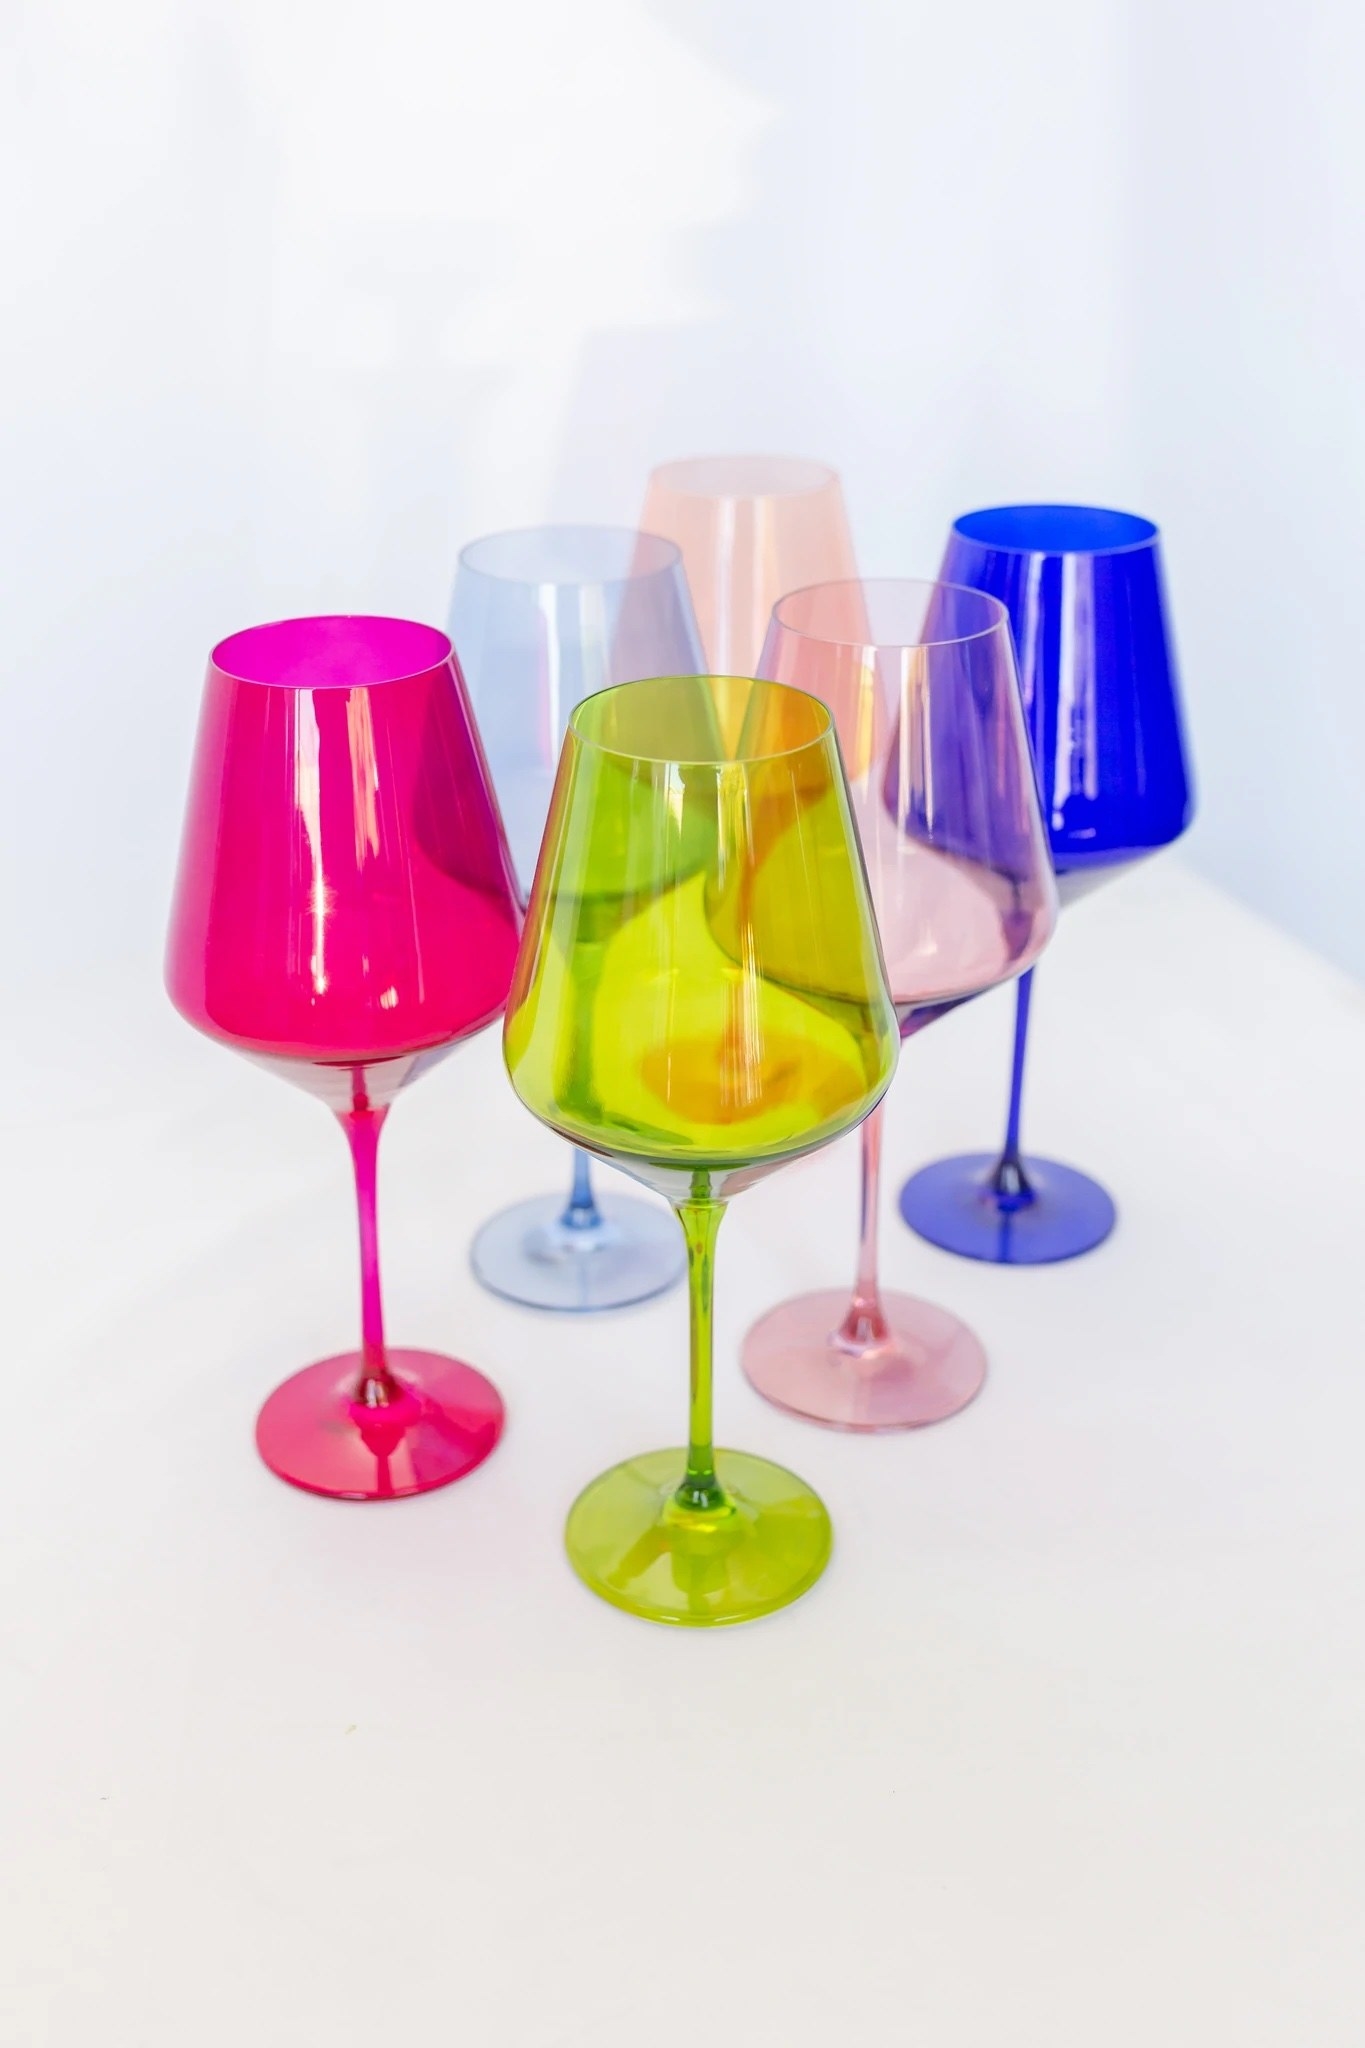 Six wine glasses; one in green, hot pink, light pink, light blue, peach, and dark blue